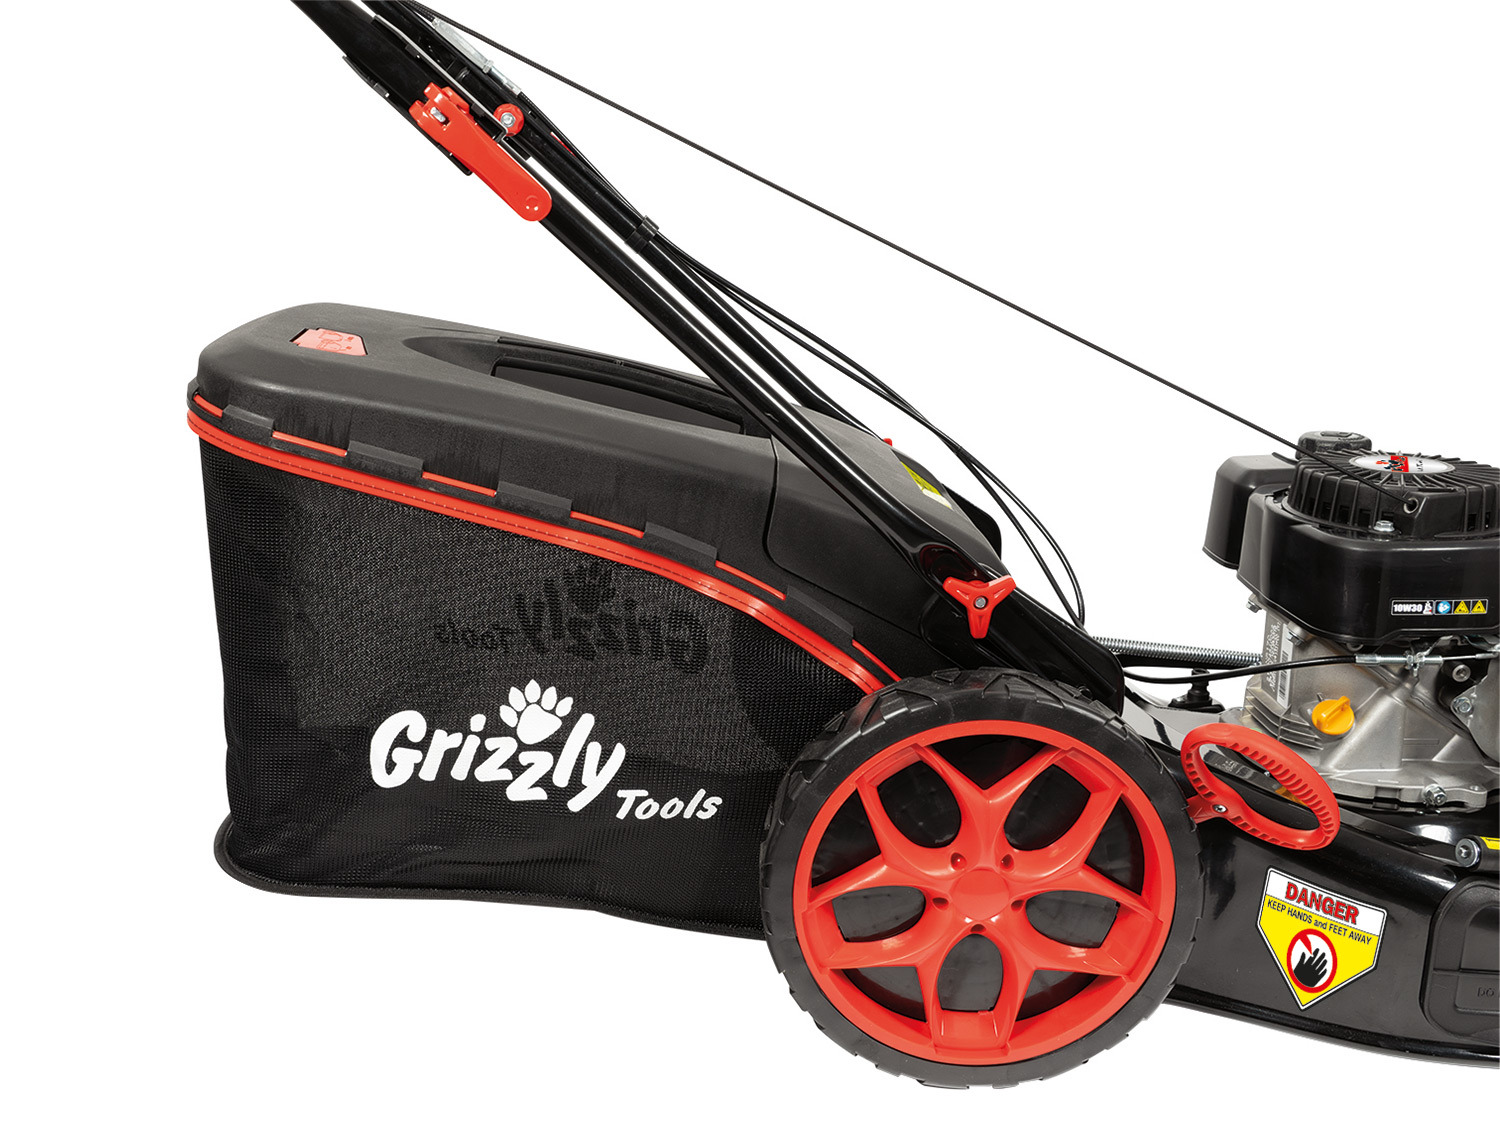 Grizzly 4in1 Benzinrasenmäher »BRM 5117-2 A«, 3,7 PS, …